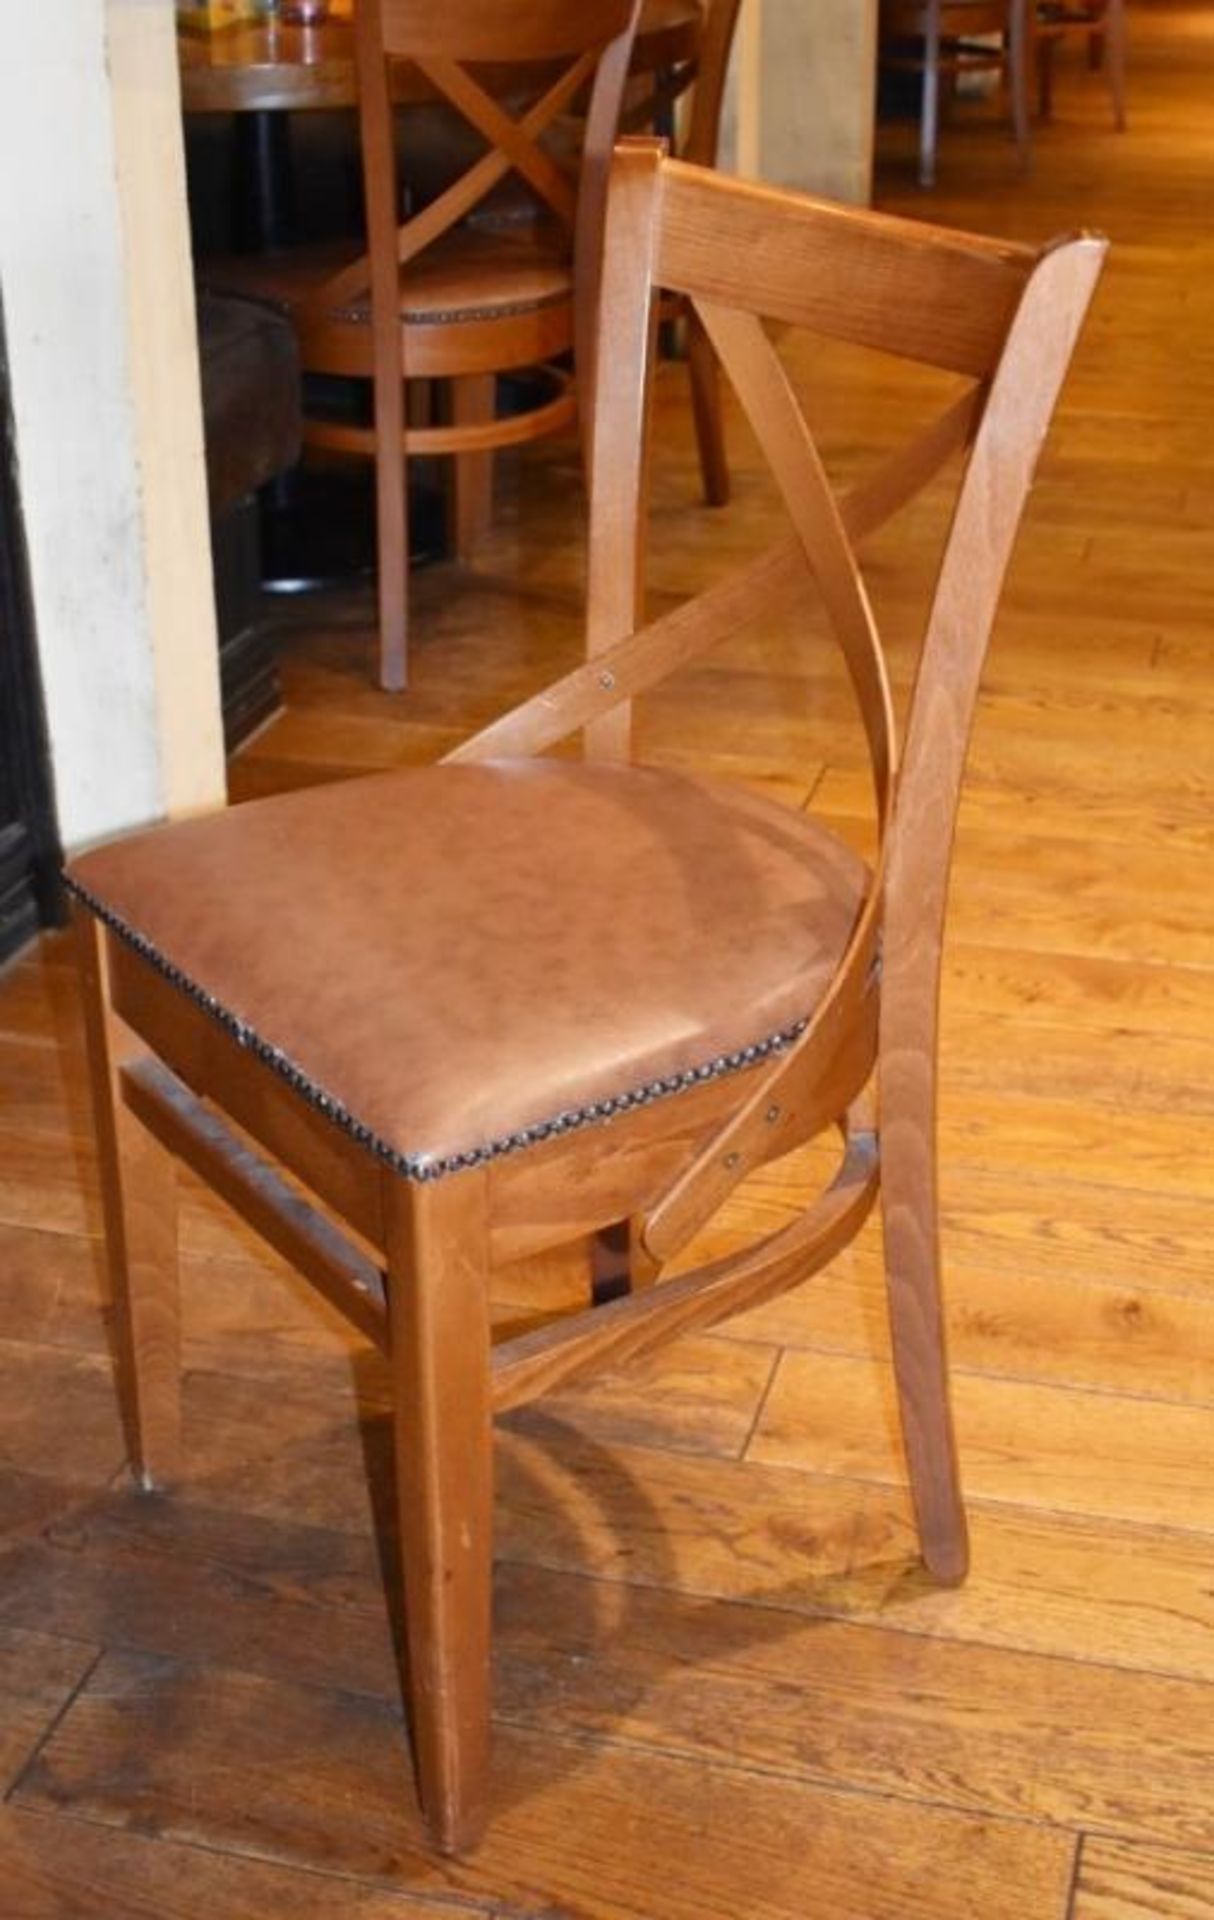 15 x Restaurant Dining Chairs With Wooden Crossbacks and Faux Leather Brown Seat Pads H84 x W45 cms - Image 4 of 4